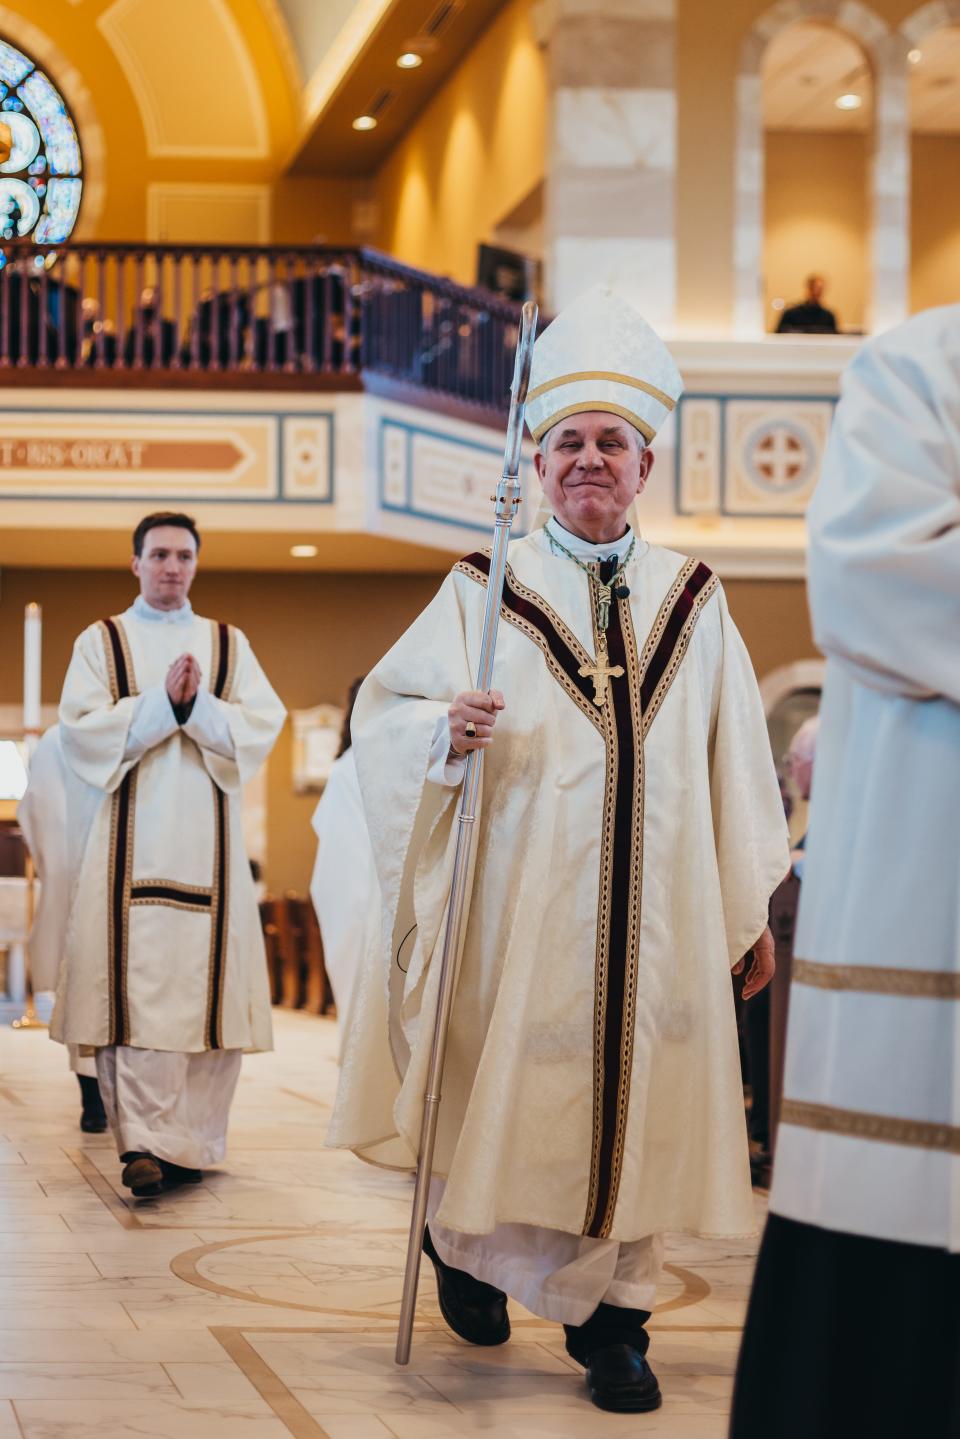 Archbishop Jerome Listecki (front) and Deacon David Sweeney lead the dedication of the new church for St. Charles Catholic Parish in Hartland on April 6.